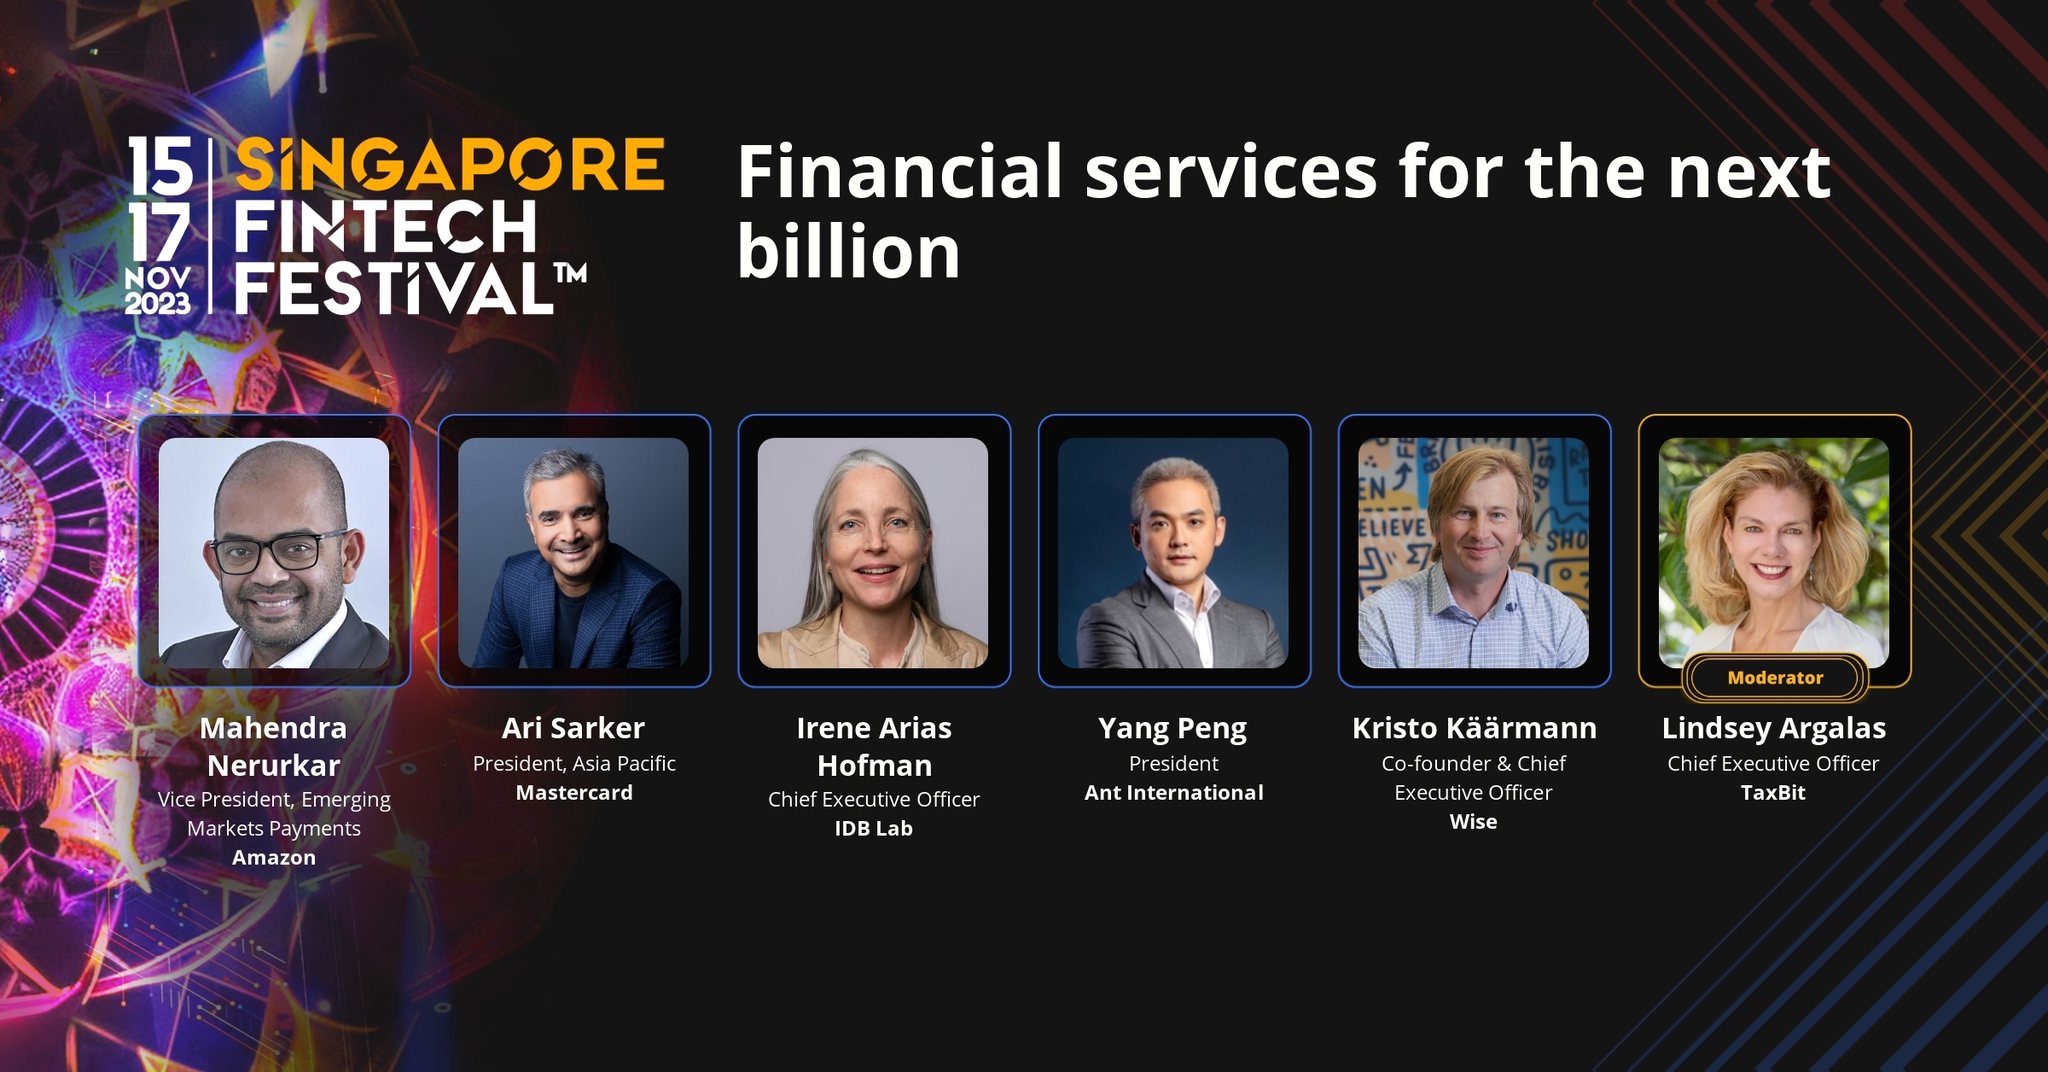 “Financial Services for the Next Billion” panel at the Singapore Fintech Festival 2023, Source: Singapore Fintech Festival, Facebook, Nov 2023